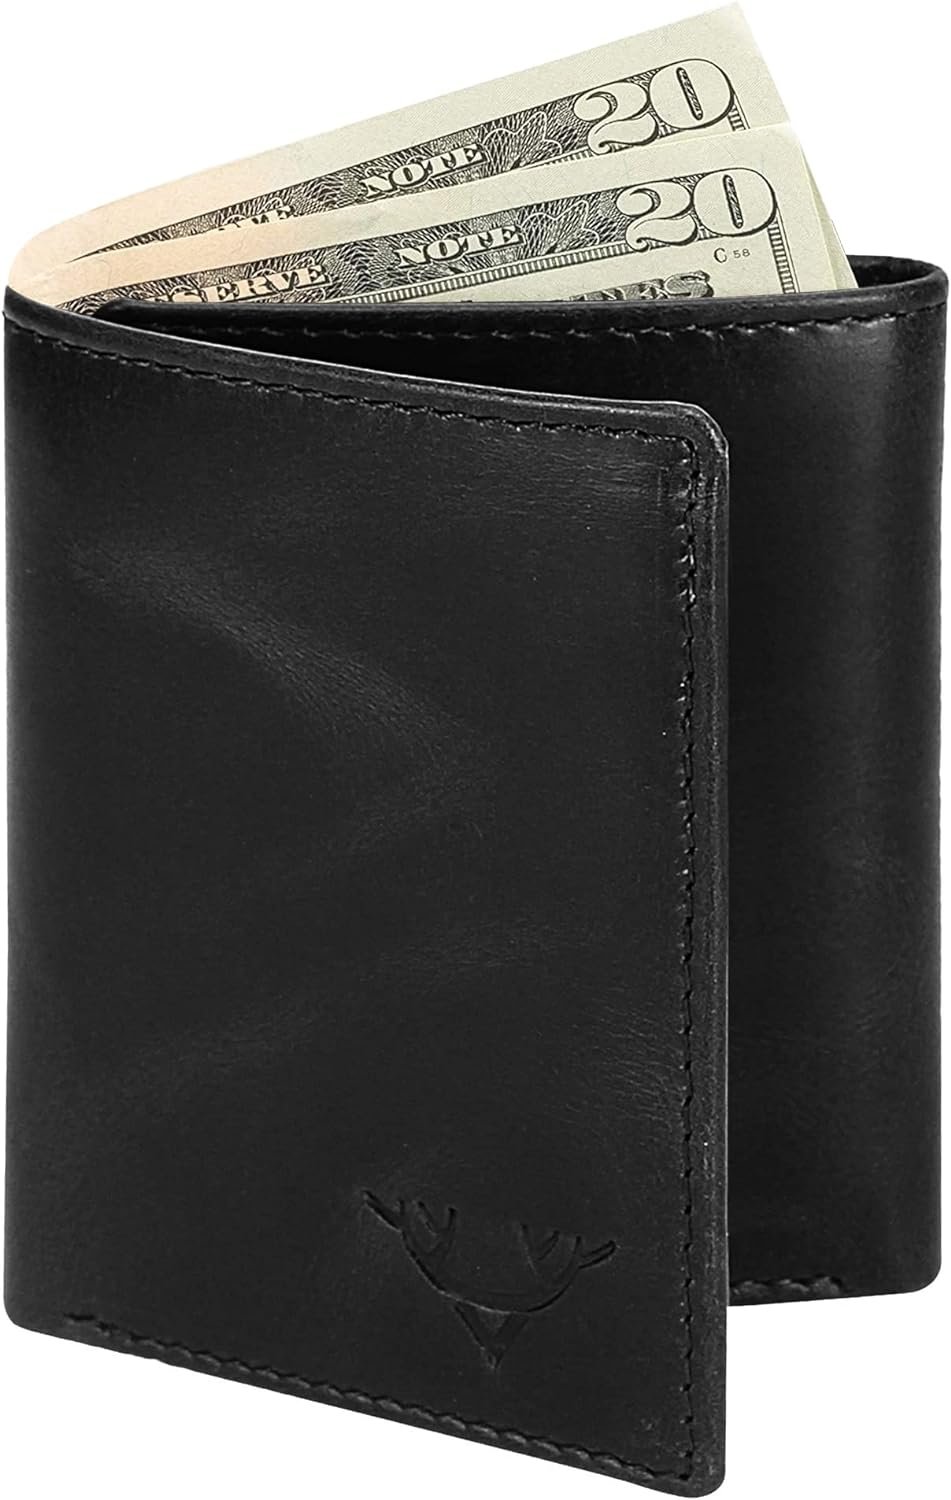 DECATINY Men’s Trifold Wallet BLACK review